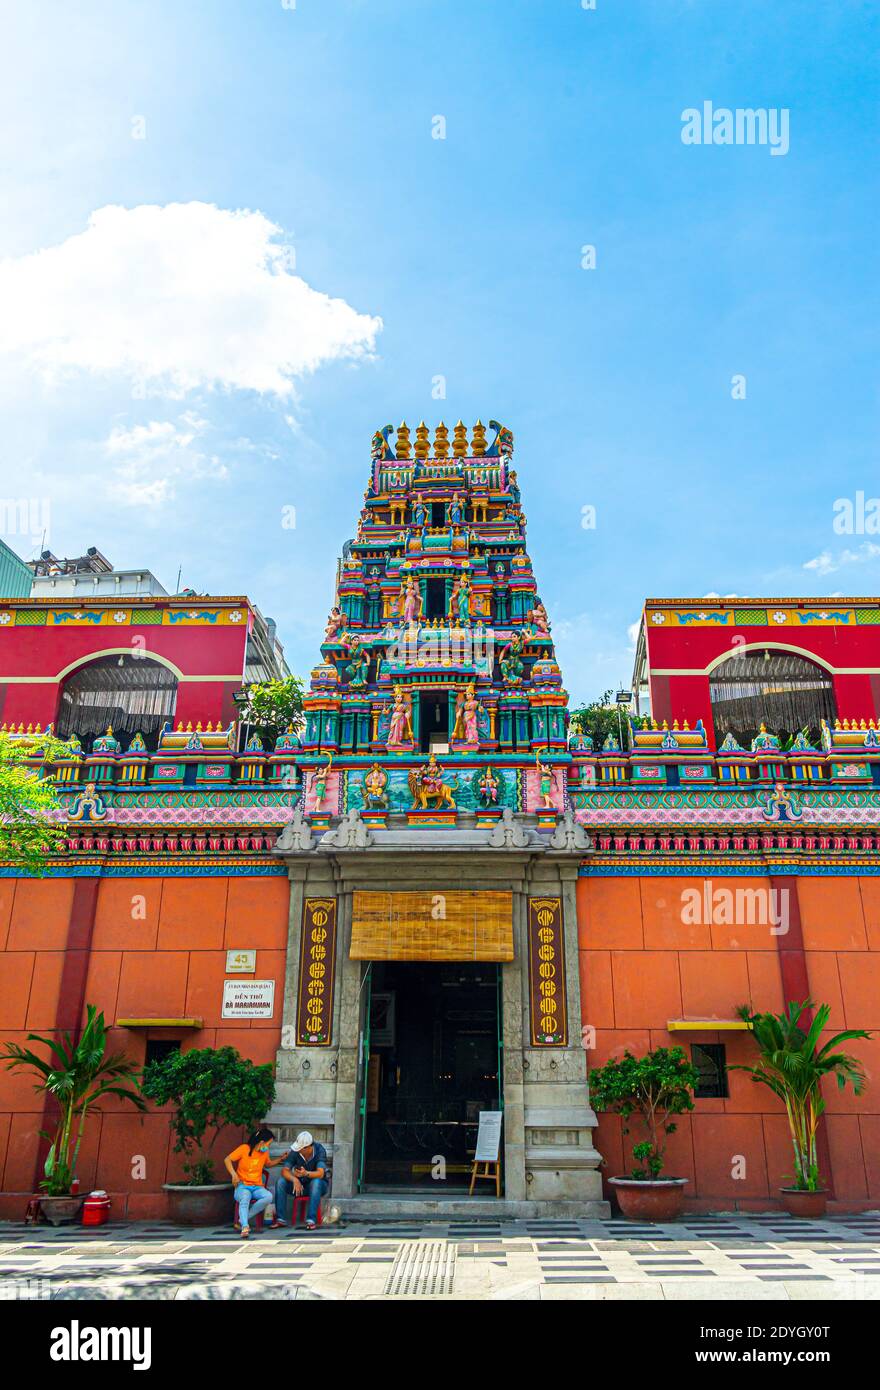 Ho Chi Minh city, Vietnam - 26 Dec 2020: Mariamman Hindu temple or "Chua Ba  Mariamman" in Ho Chi Minh city, Vietnam. The temple was built in the late  Stock Photo - Alamy